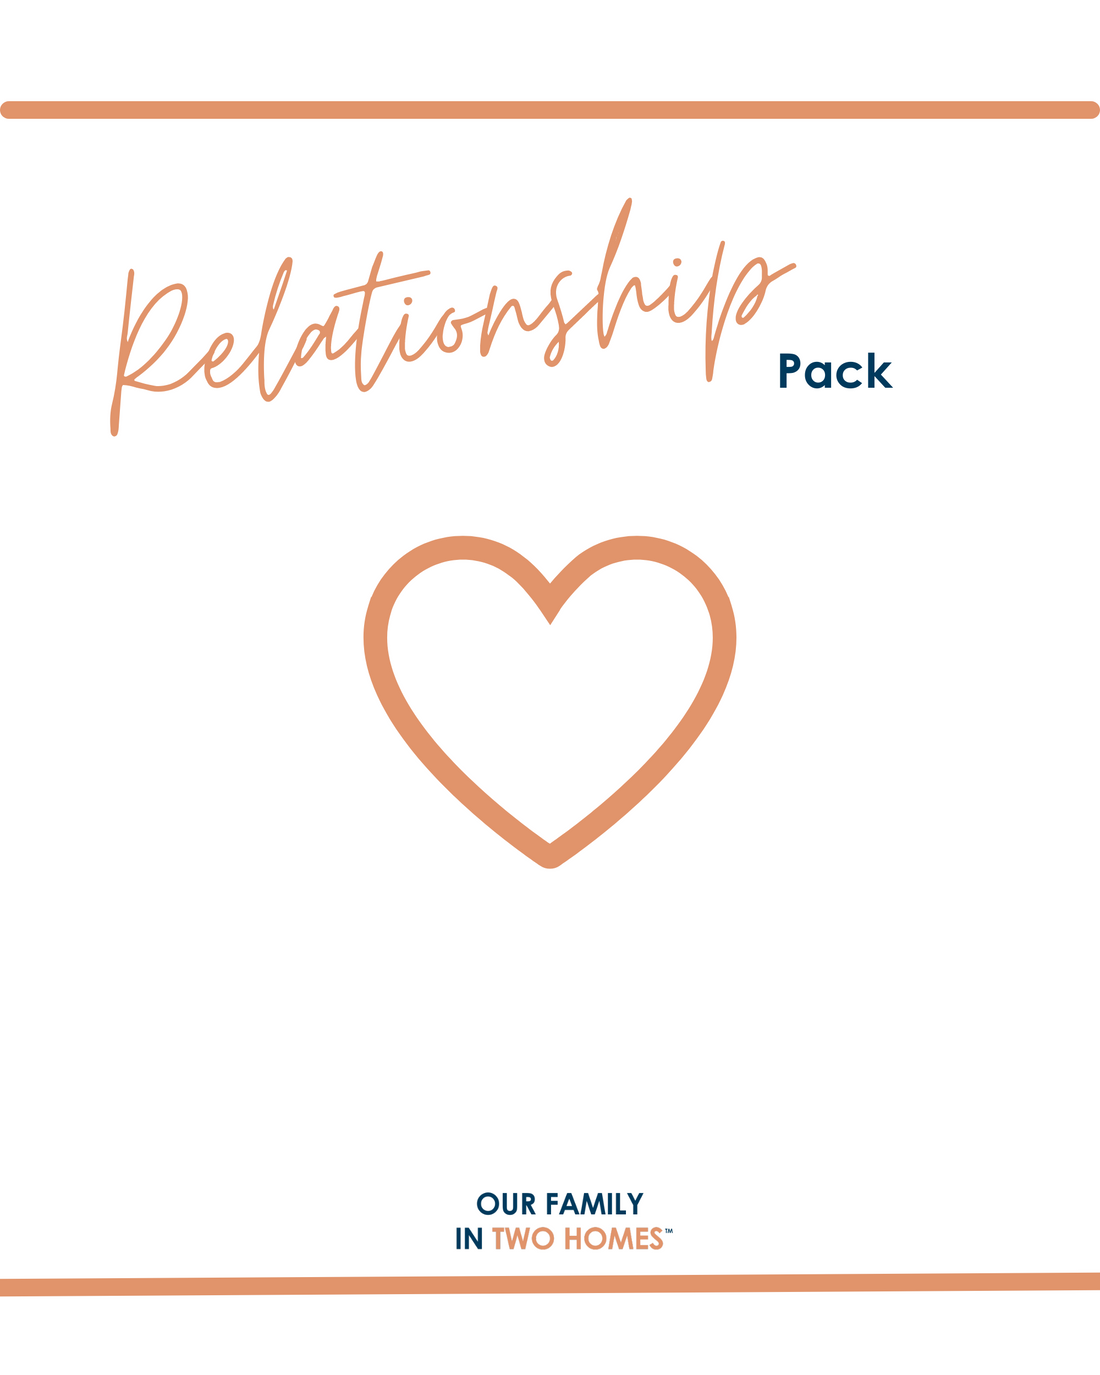 Relationship Pack